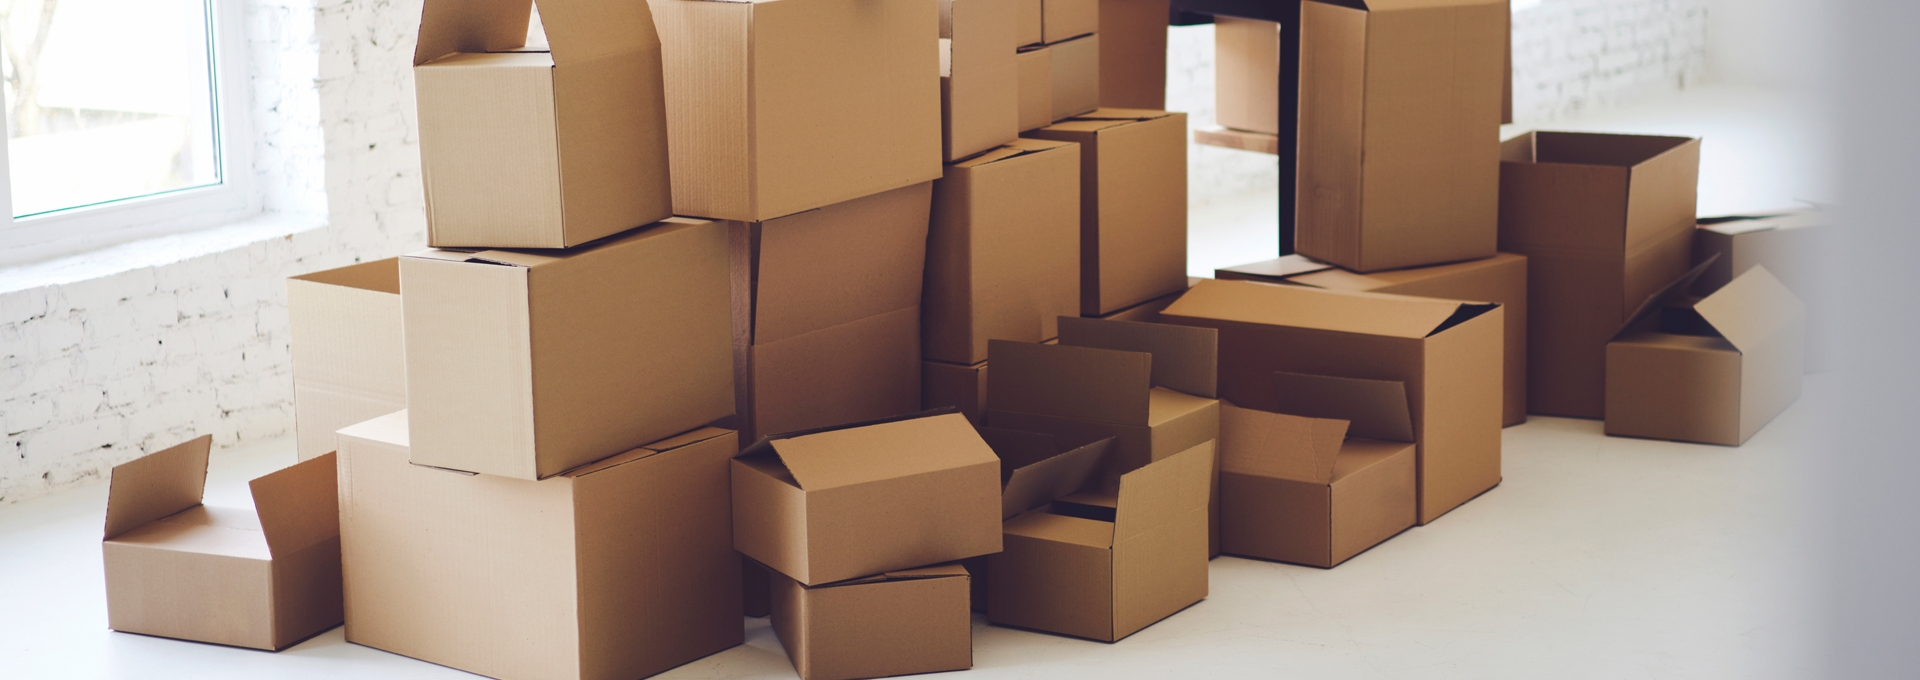 San Diego Moving and Storage Services | Best Bet Movers